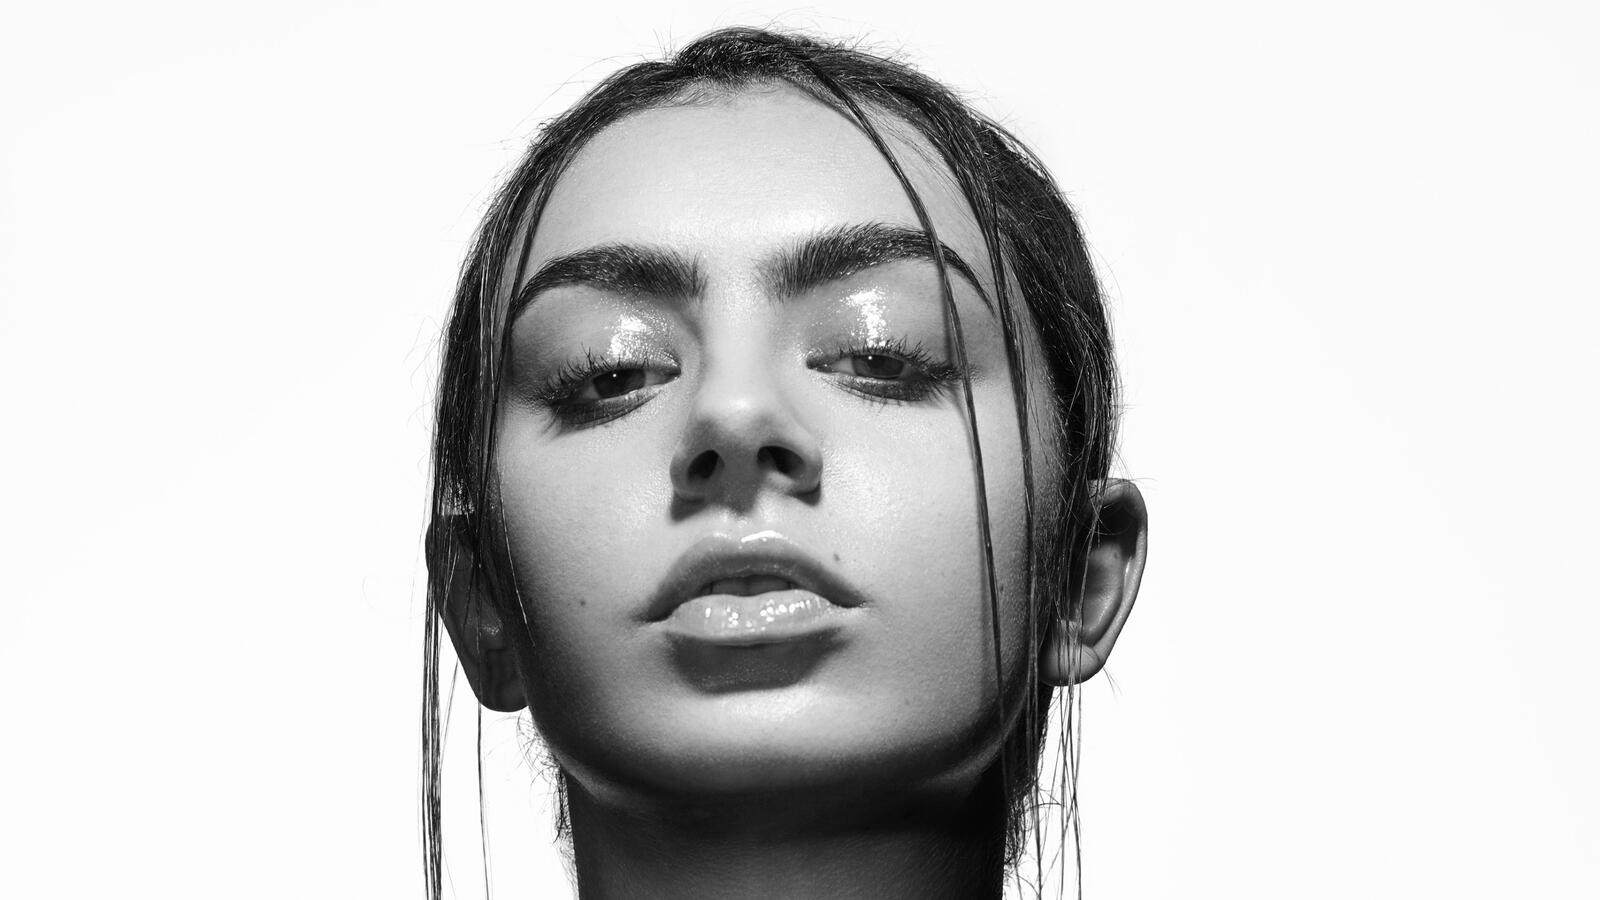 Wallpapers Charli Xcx girls black and white on the desktop